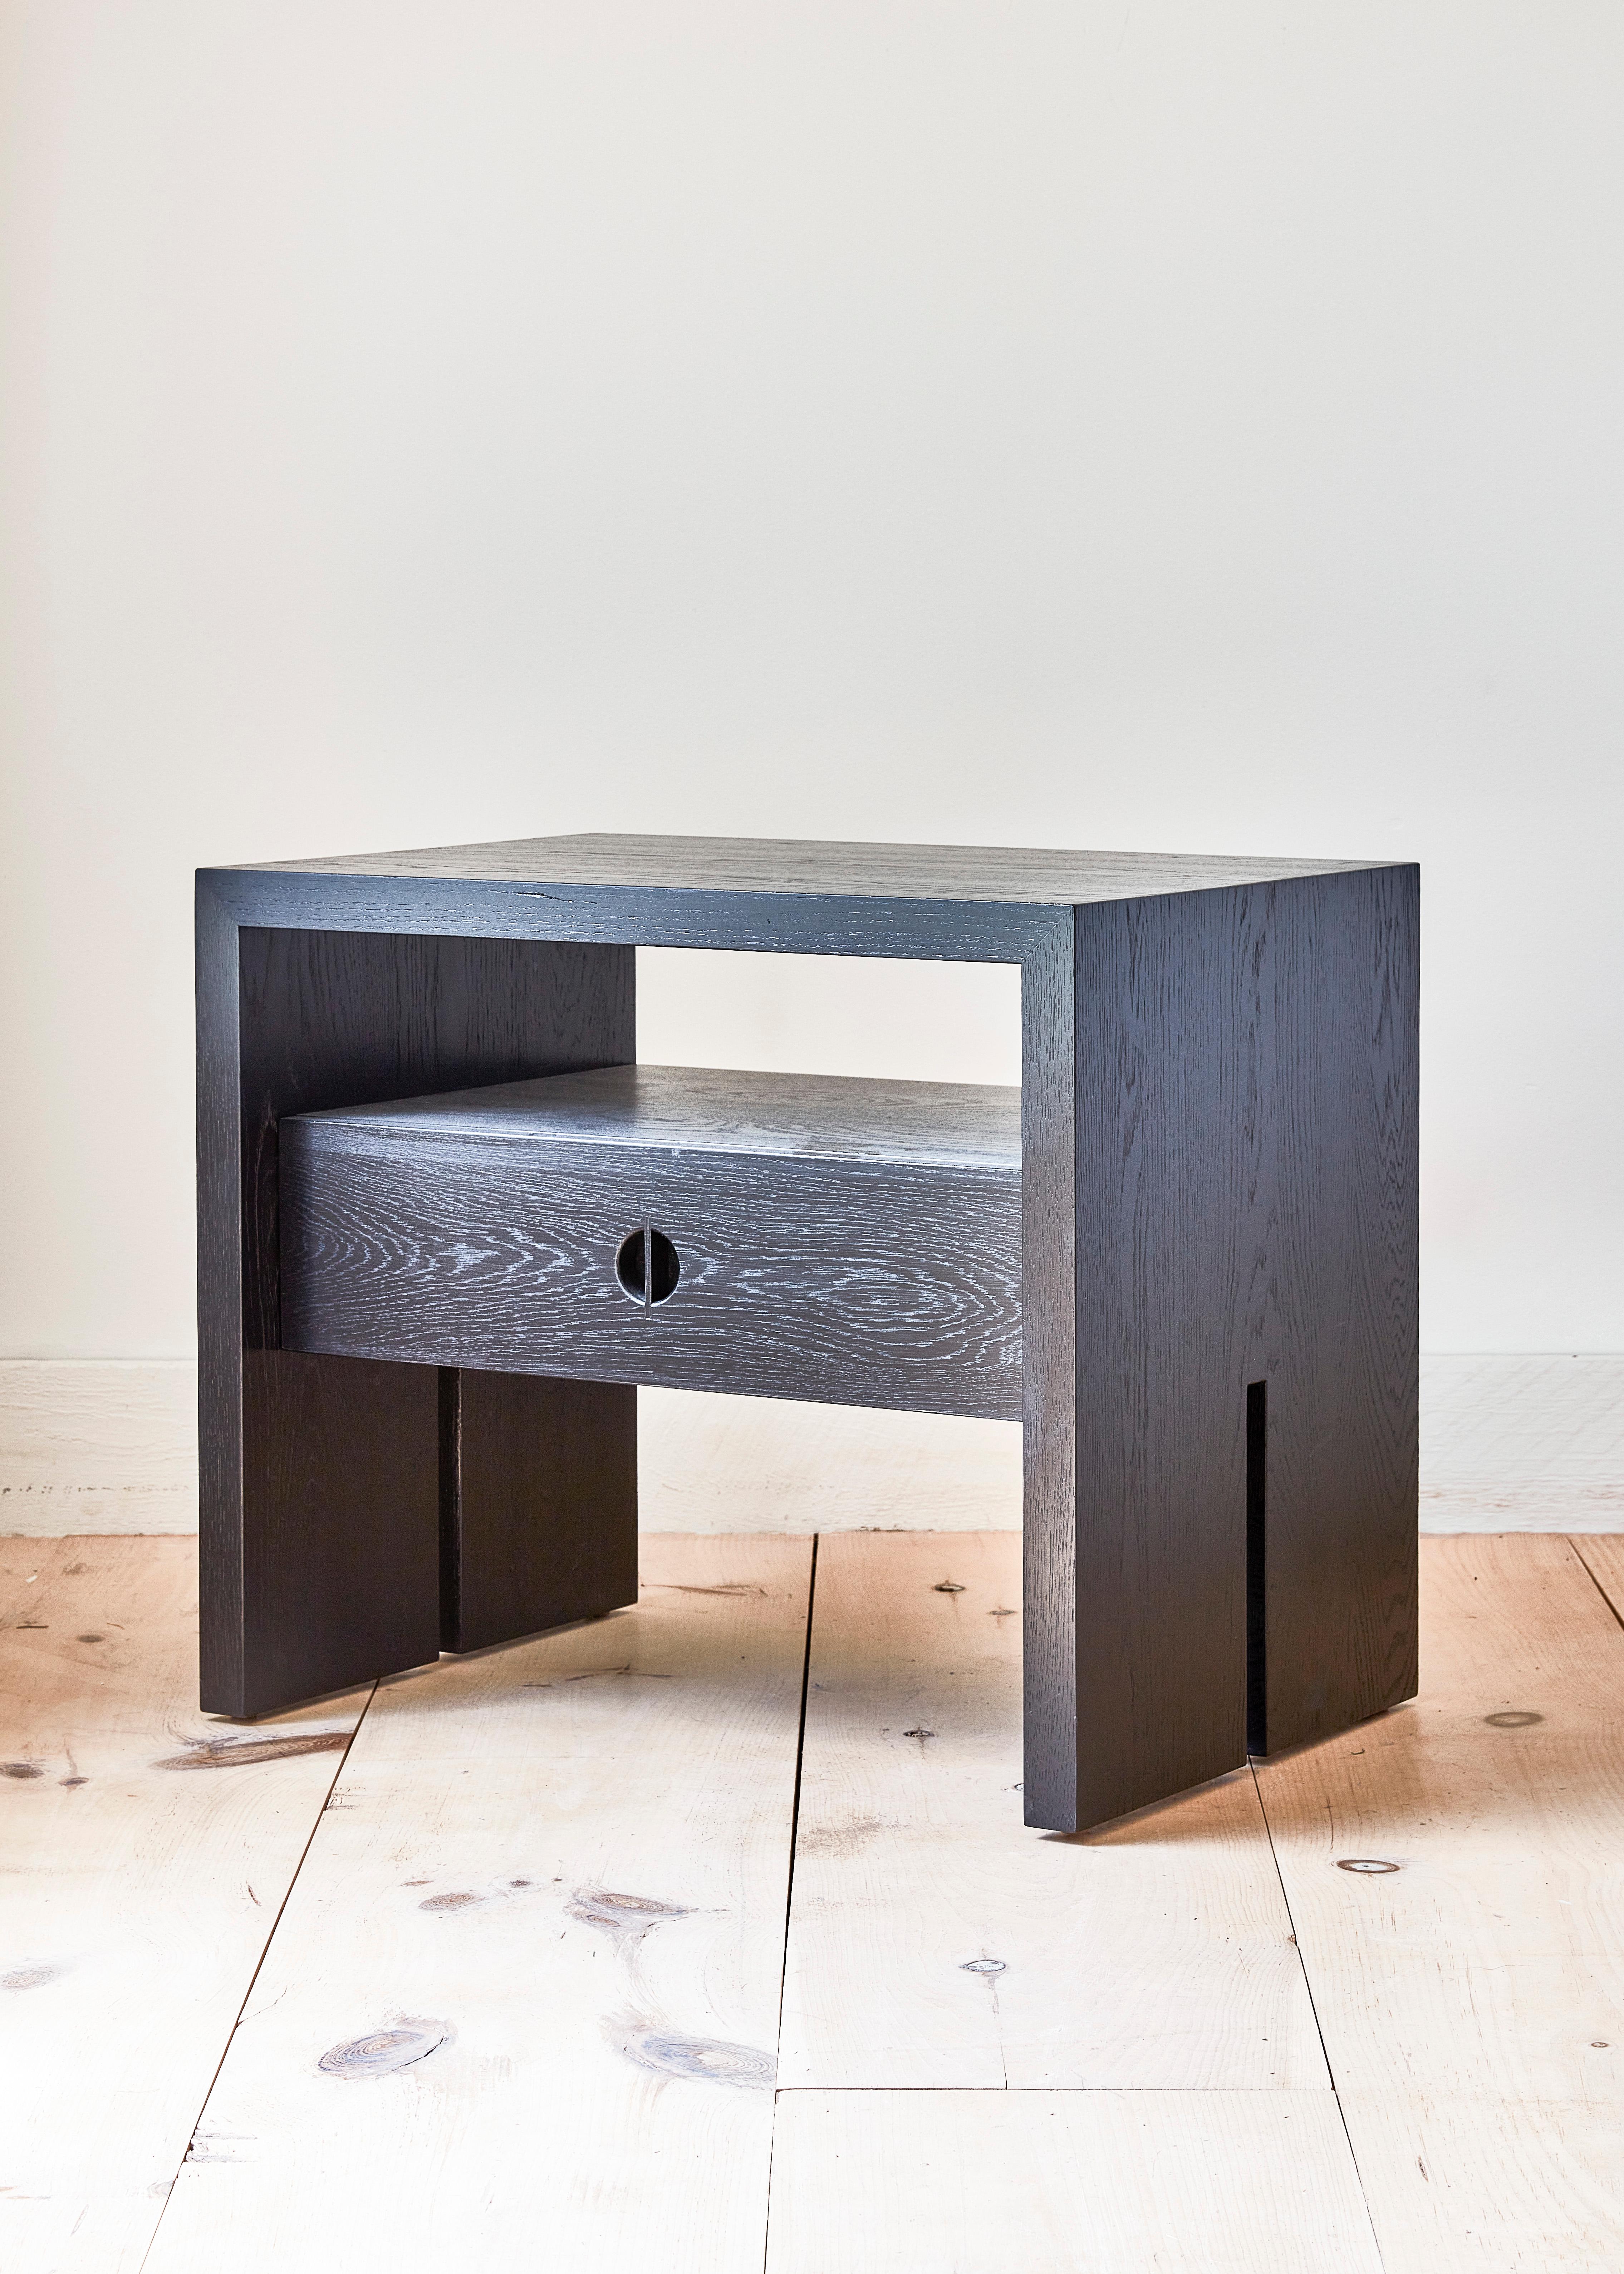 This custom wood nightstand is hand-made in the United States with all hardwood construction. Characterized by its striking waterfall design, unique split leg detail, and convenient and accessible storage drawer, the minimalist Jameson bedside table